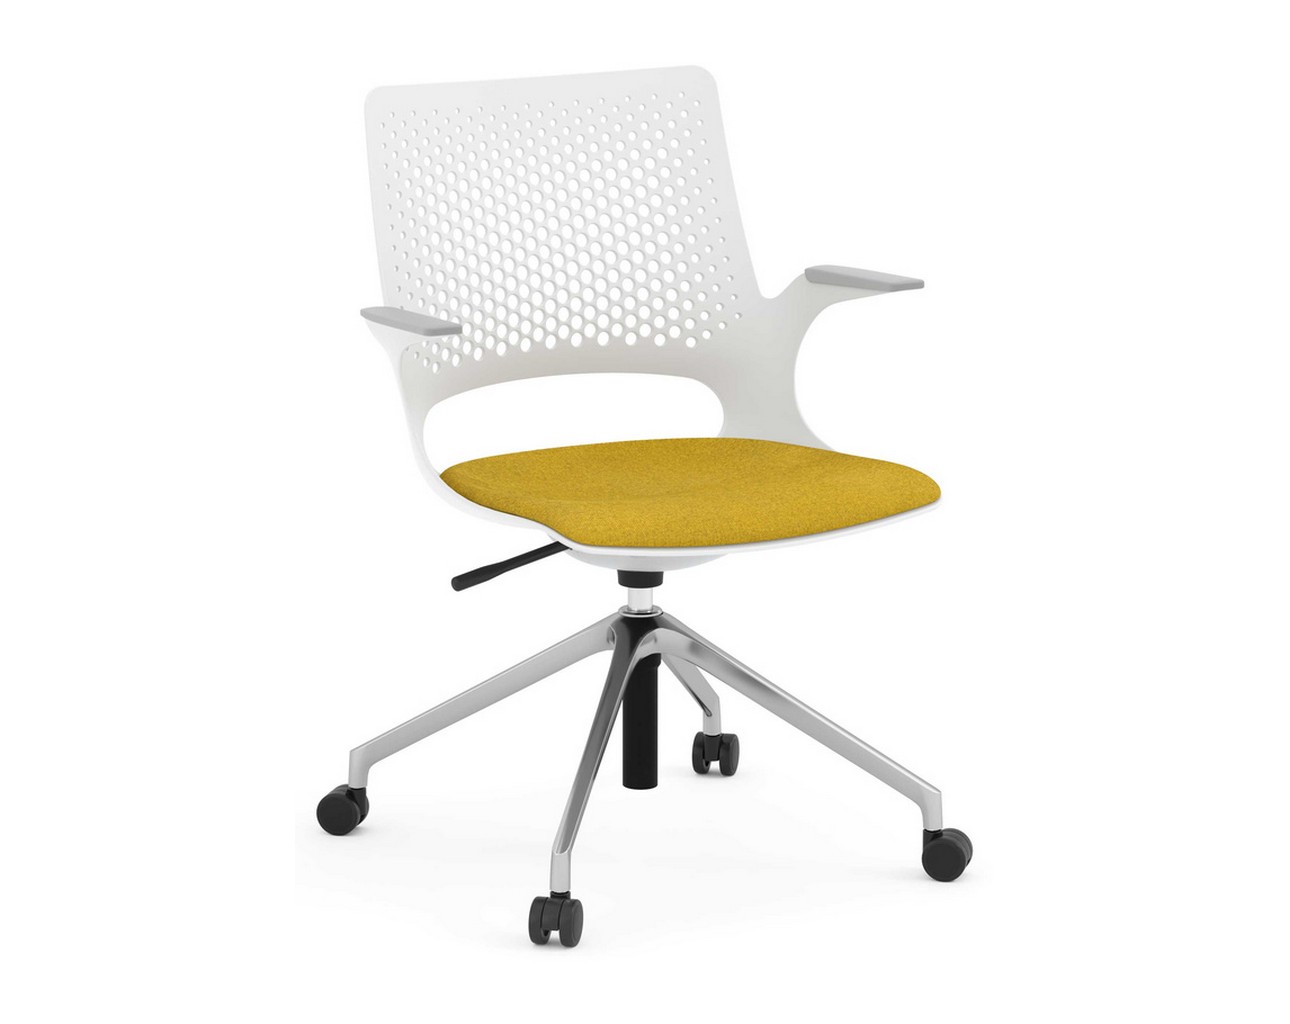 Harmony Multi-Purpose Chair – Polished Aluminum Base and Light Grey Frame with Mustard Seat